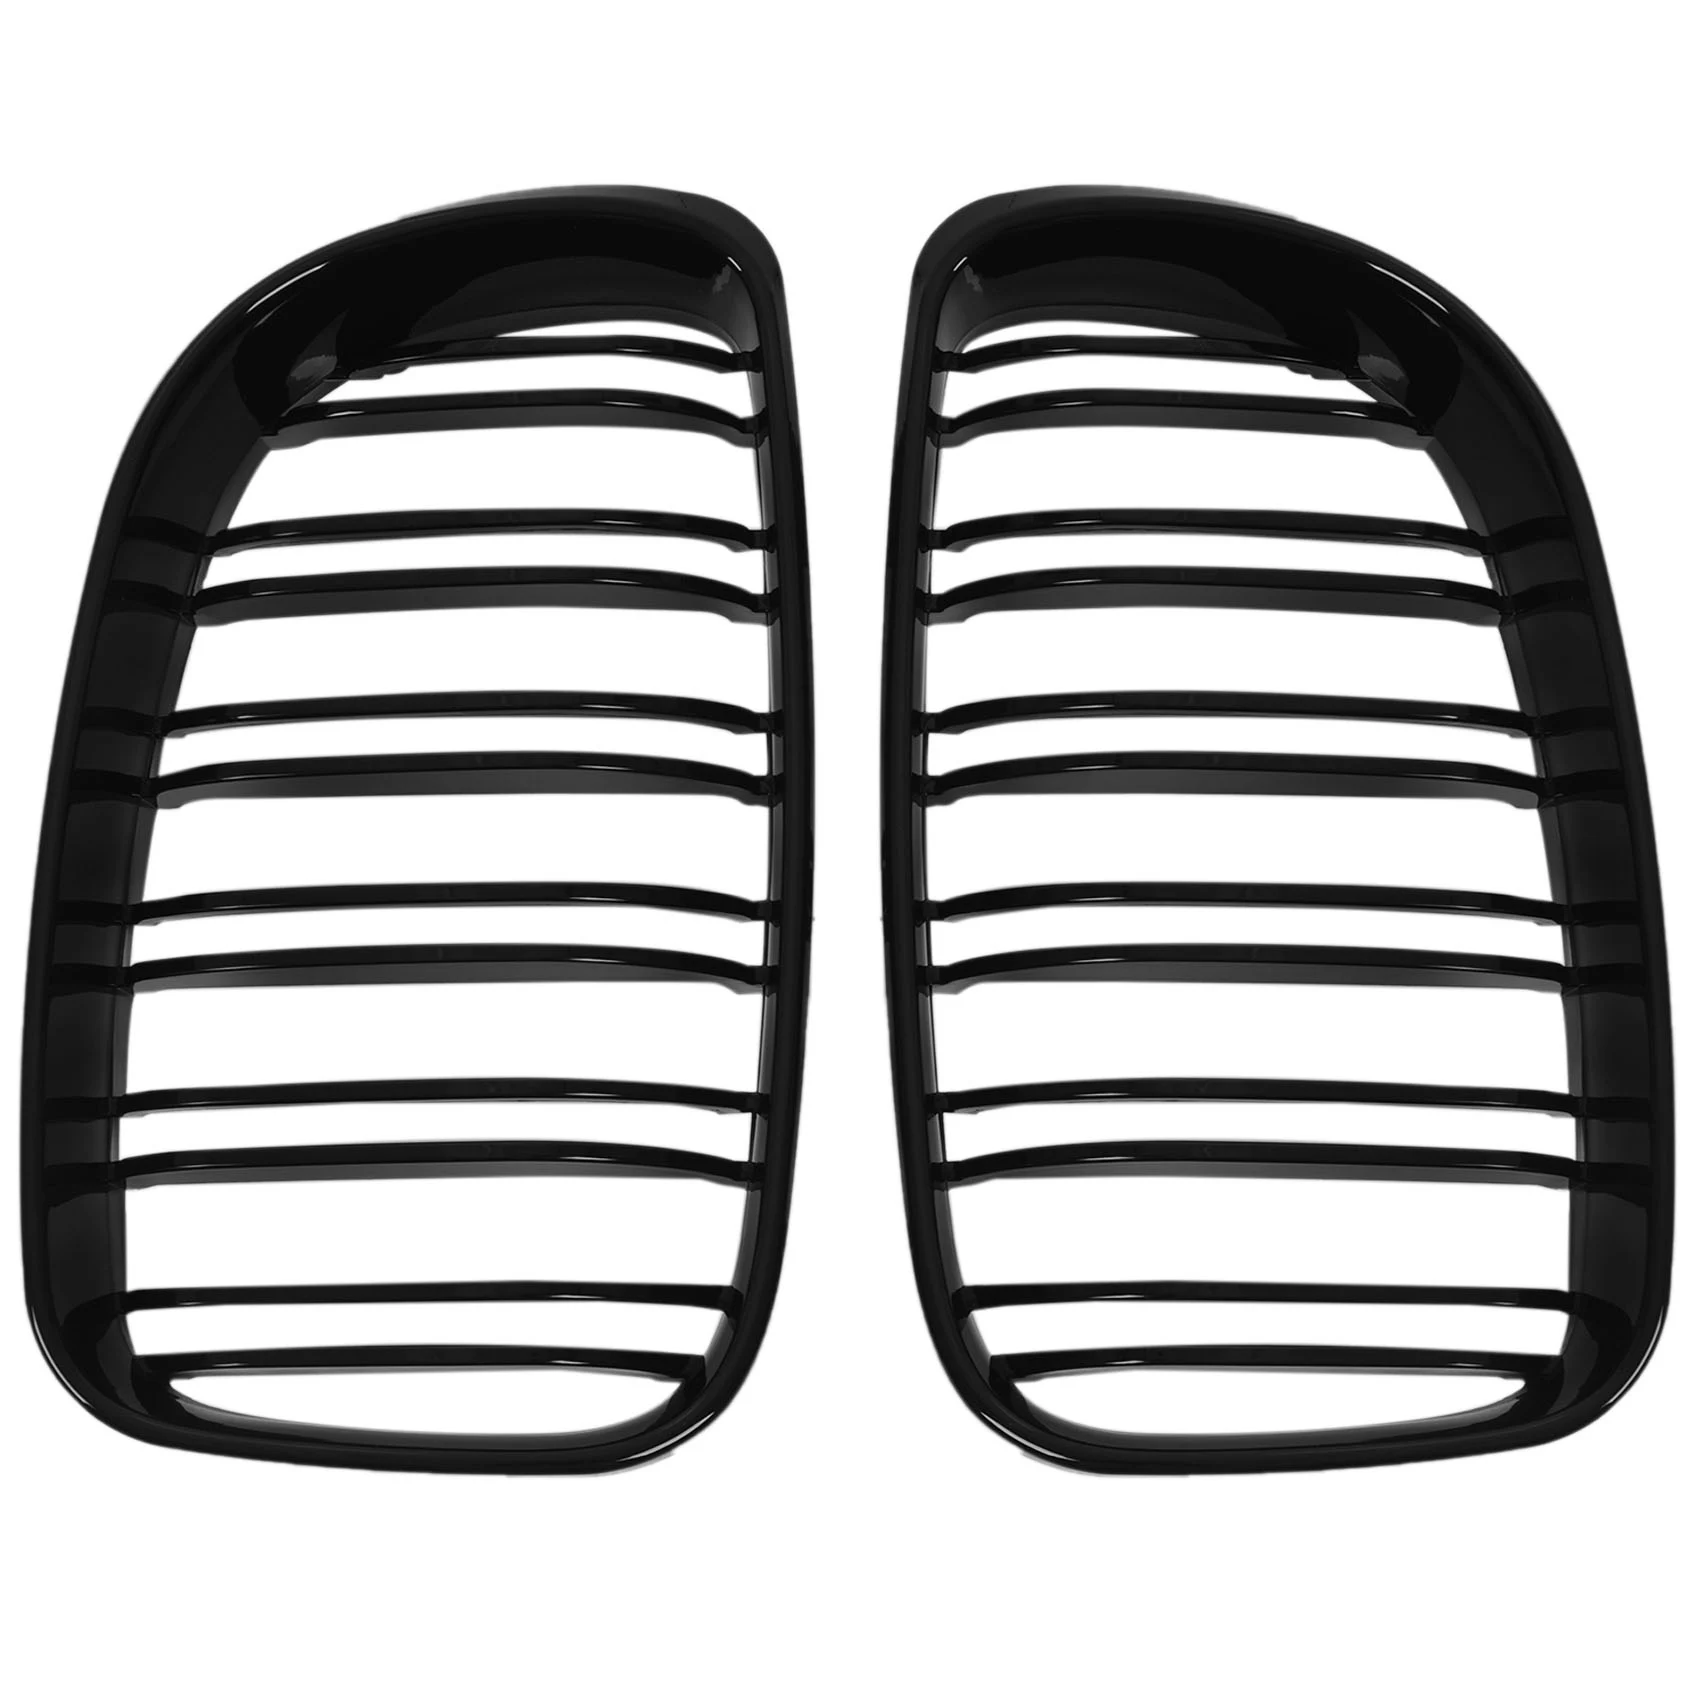 

Glossy Black Dual Slats Front Kidney Grille Grill Replacement for BMW E81 E87 E82 E88 120I 128I 130I 135I Selected 2007-2011